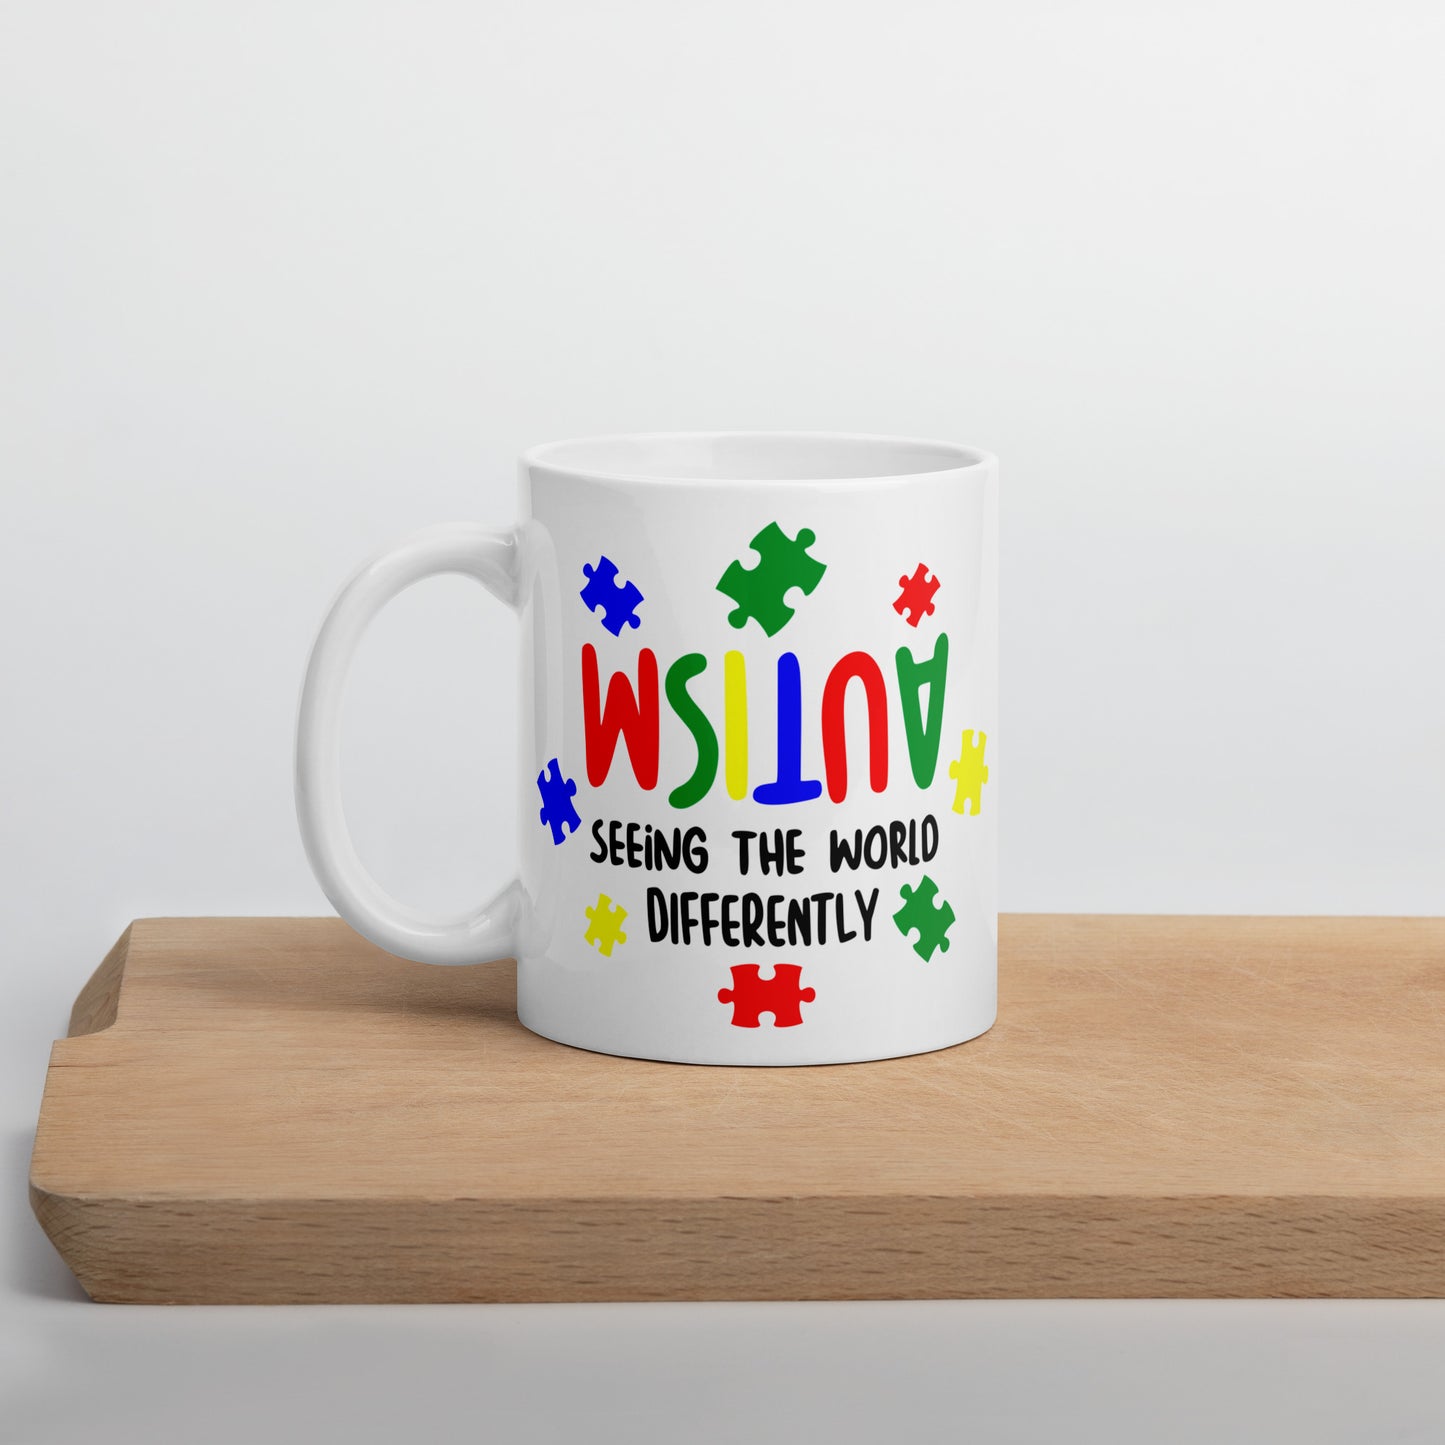 Seeing the World Differently Autism Acceptance Ceramic Coffee Mug